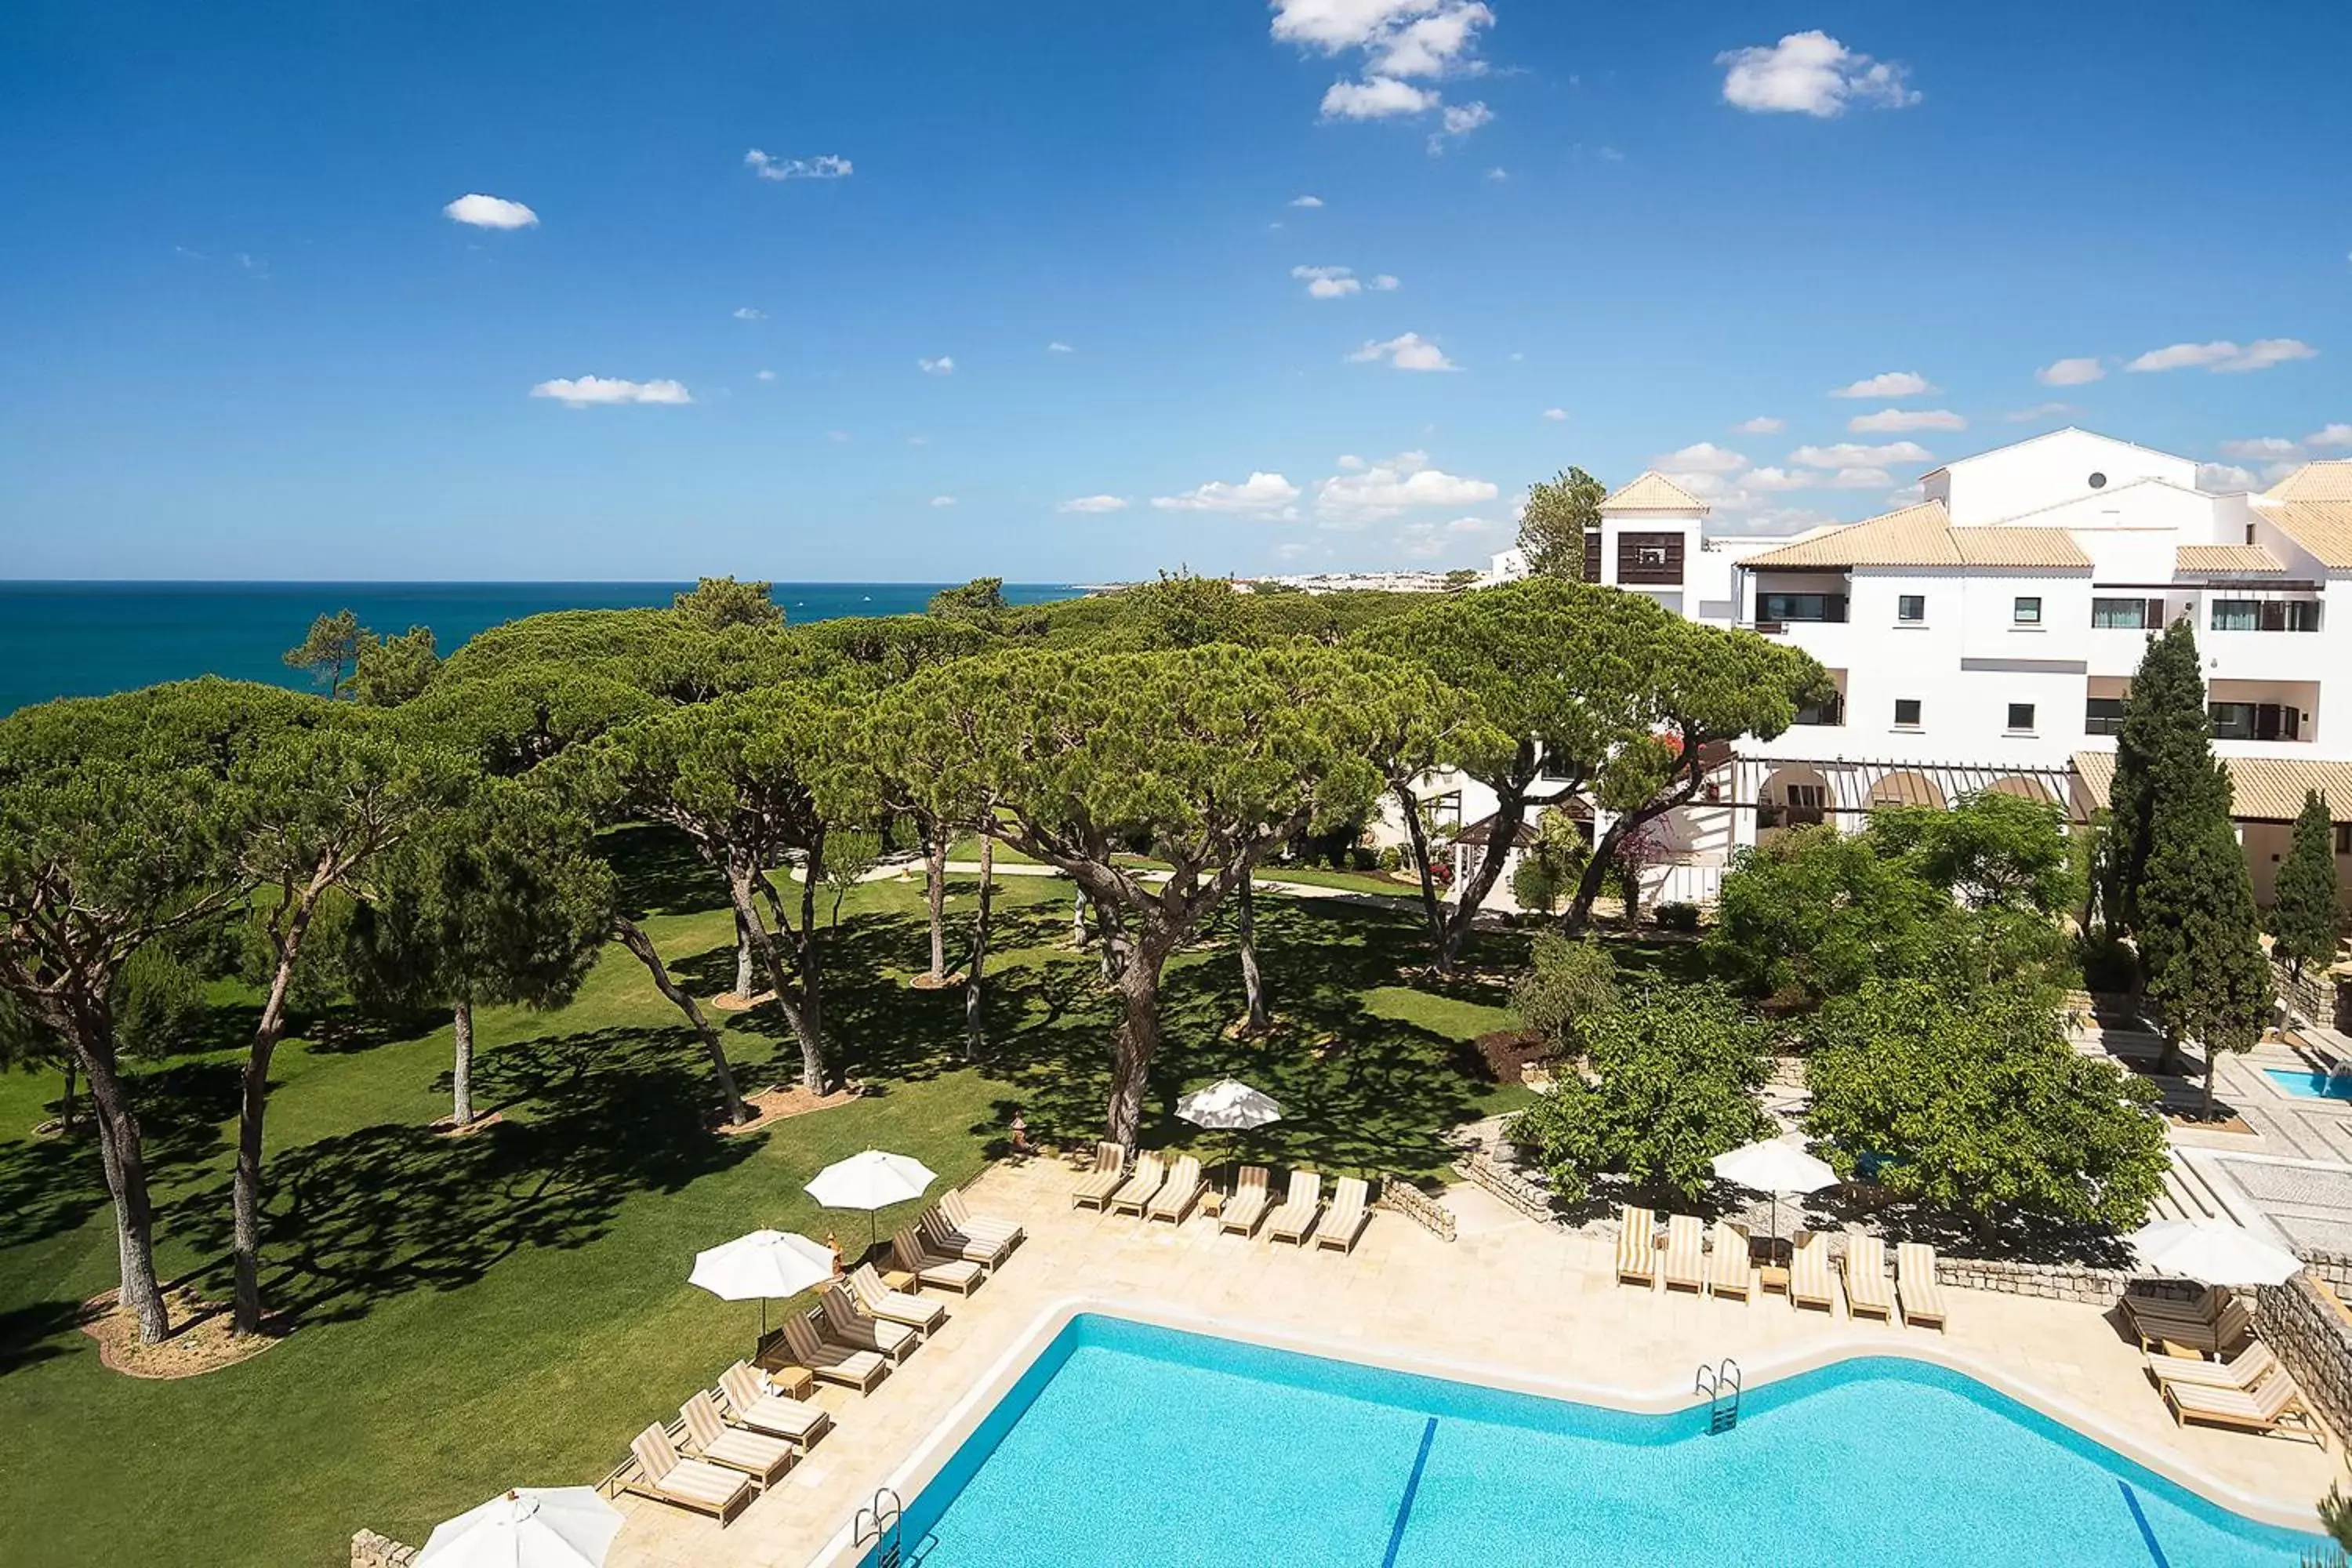 Property building, Pool View in Pine Cliffs Hotel, a Luxury Collection Resort, Algarve